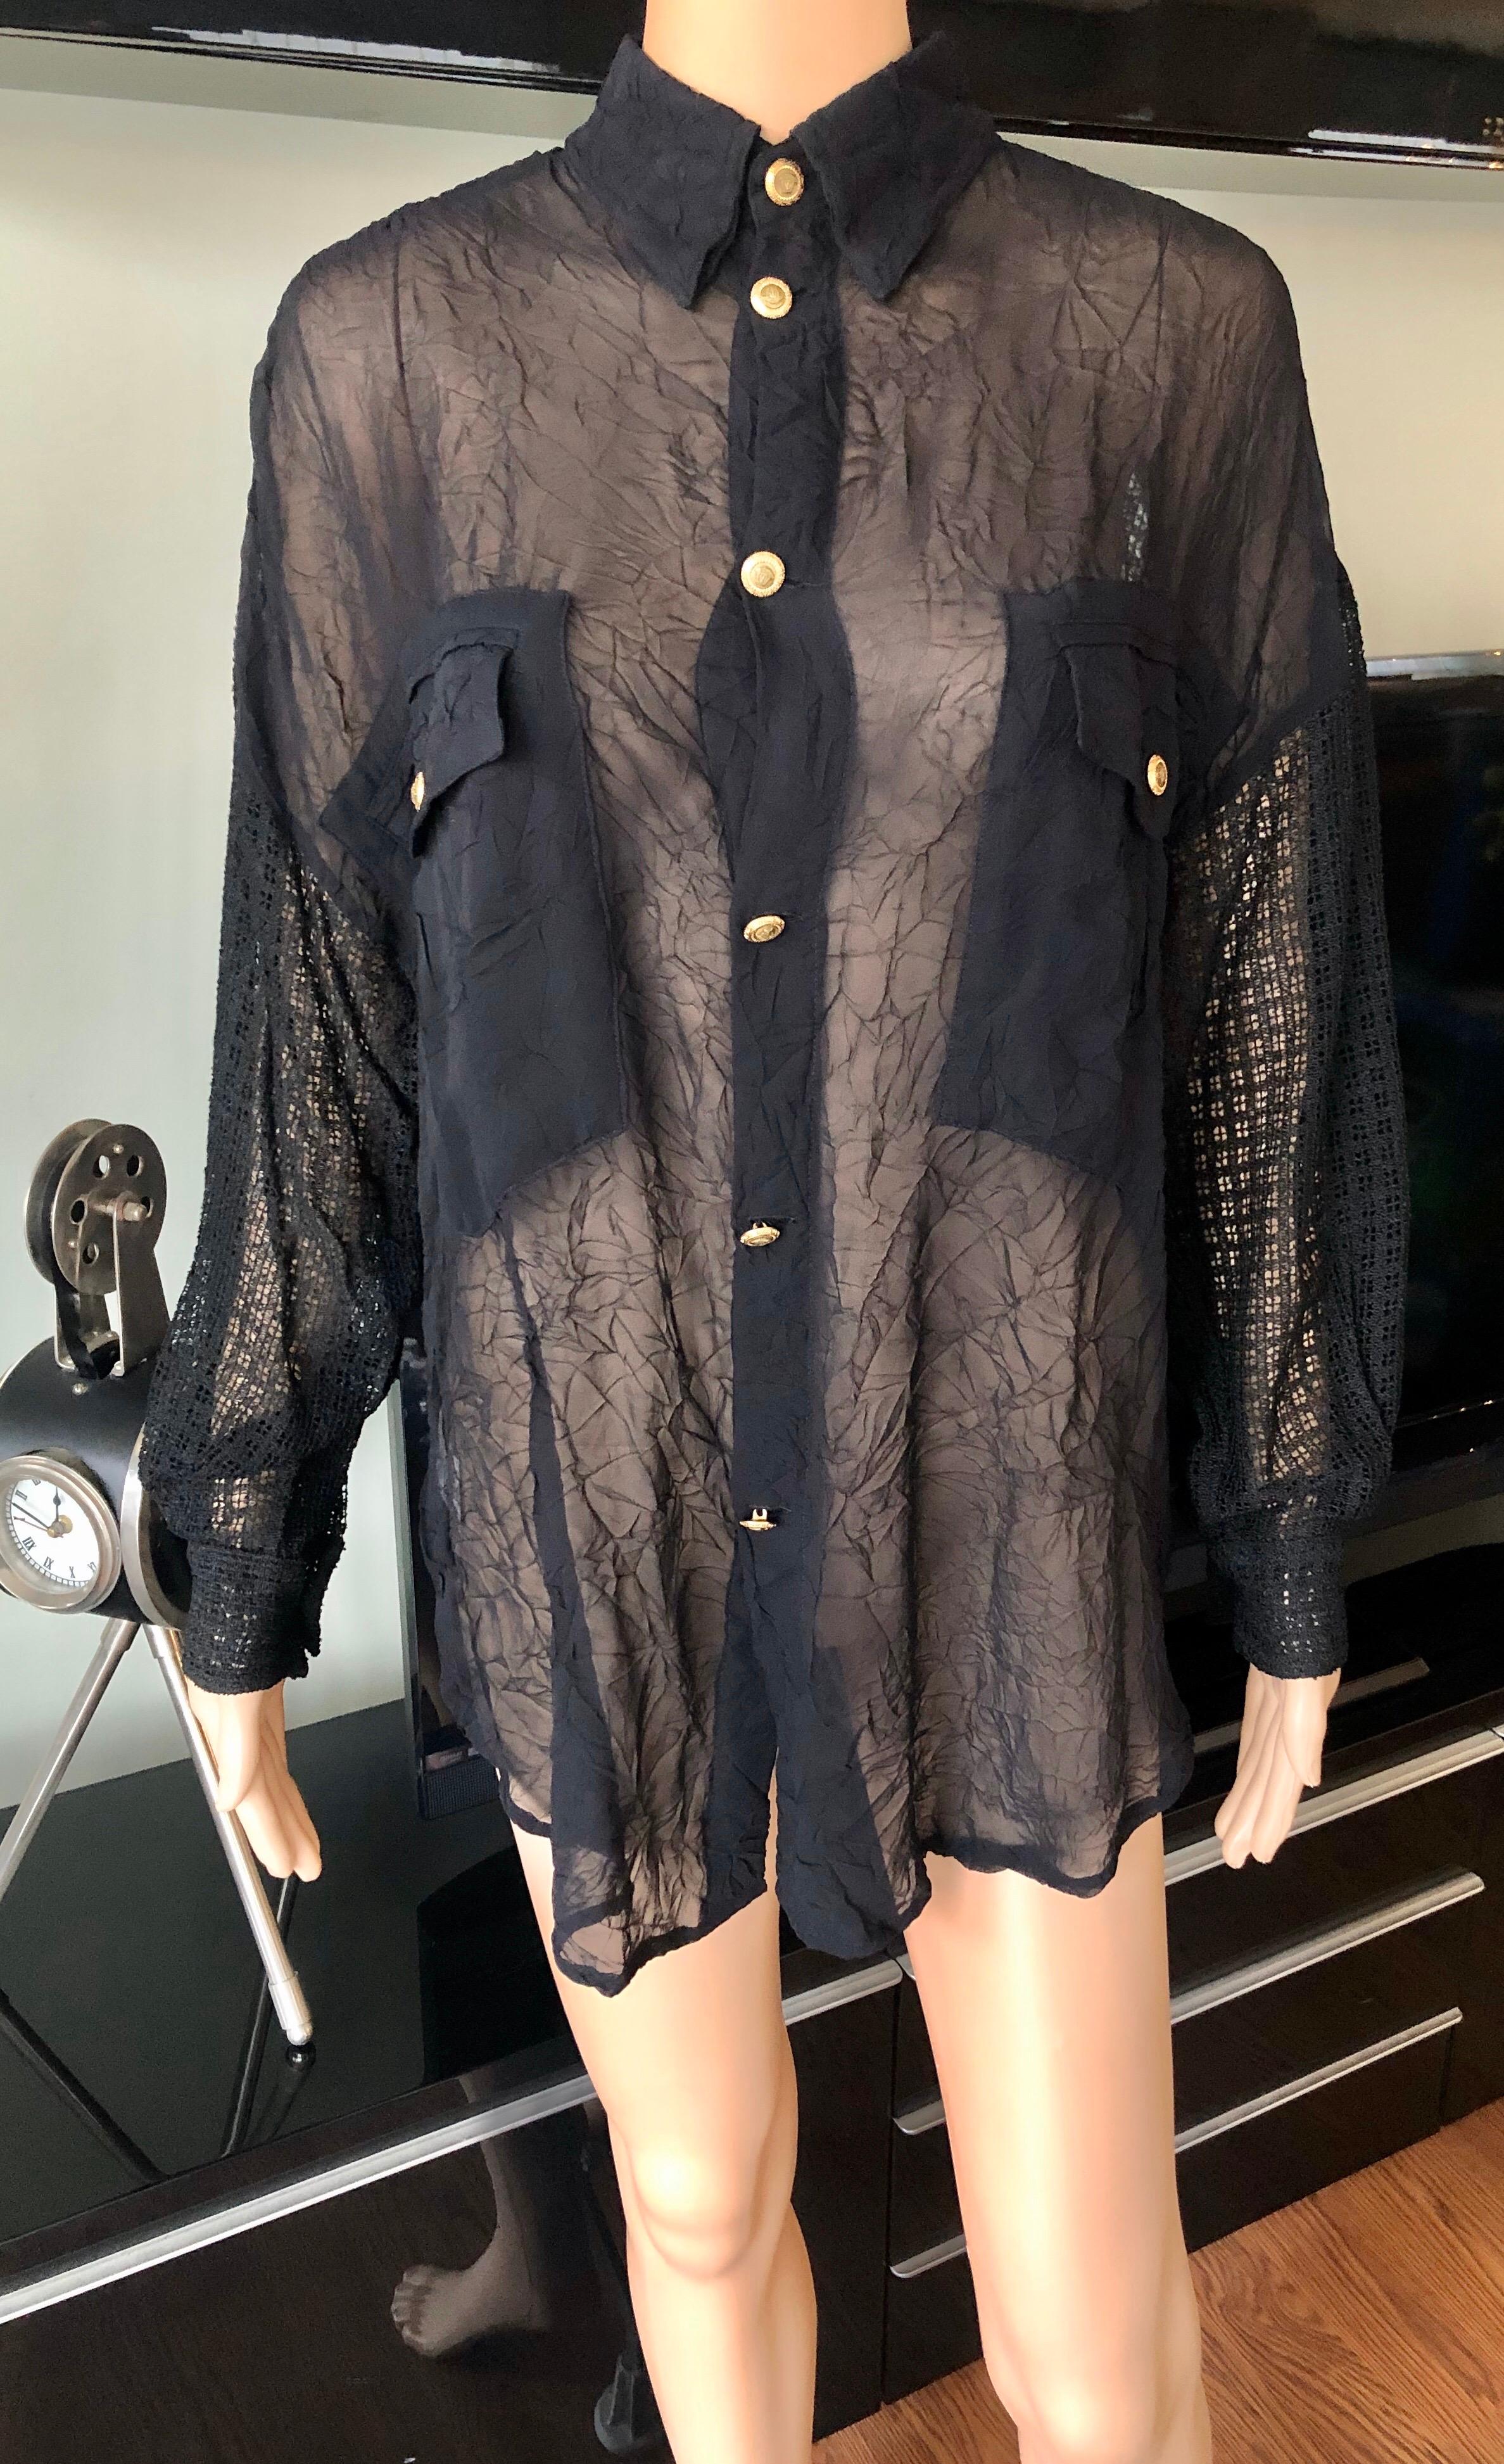 Gianni Versace c. 1990 Vintage Sheer Silk Mesh Black Shirt Blouse Top In Good Condition For Sale In Naples, FL